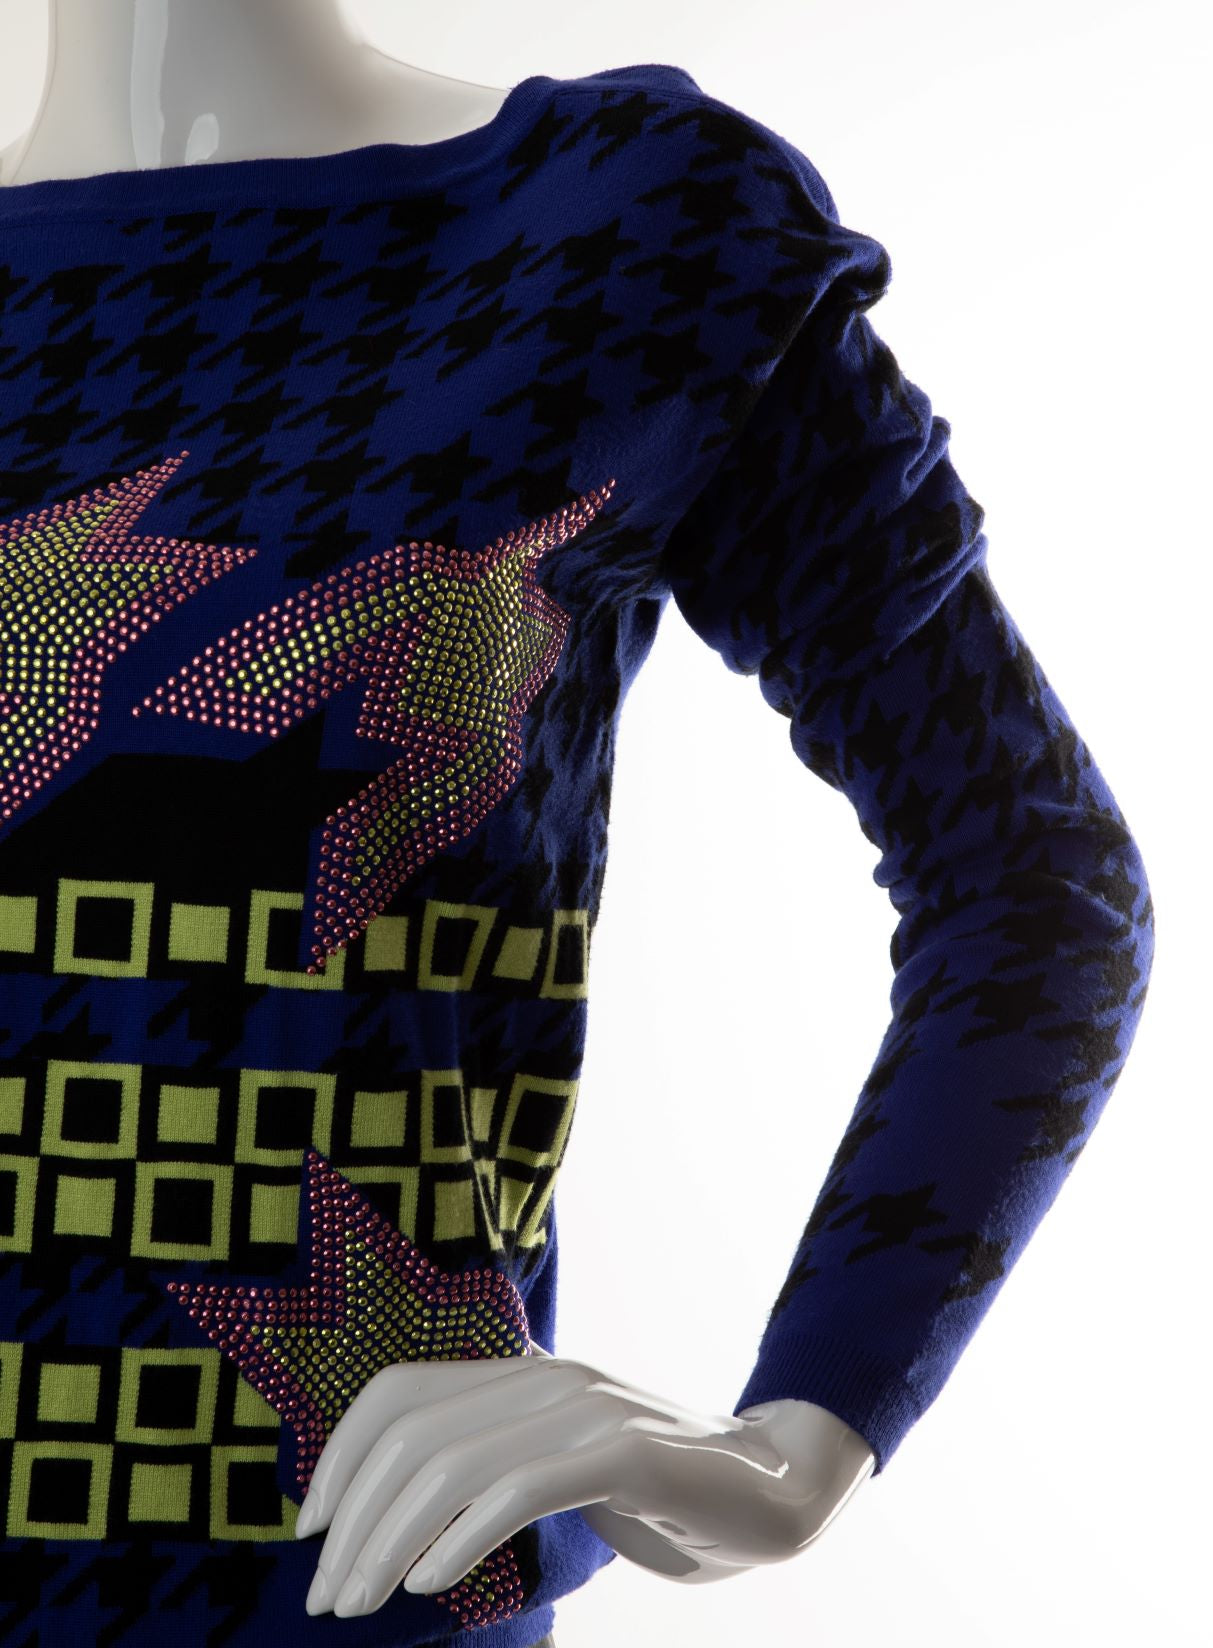 Versace - Printed Knit Top with Studded Embellishment